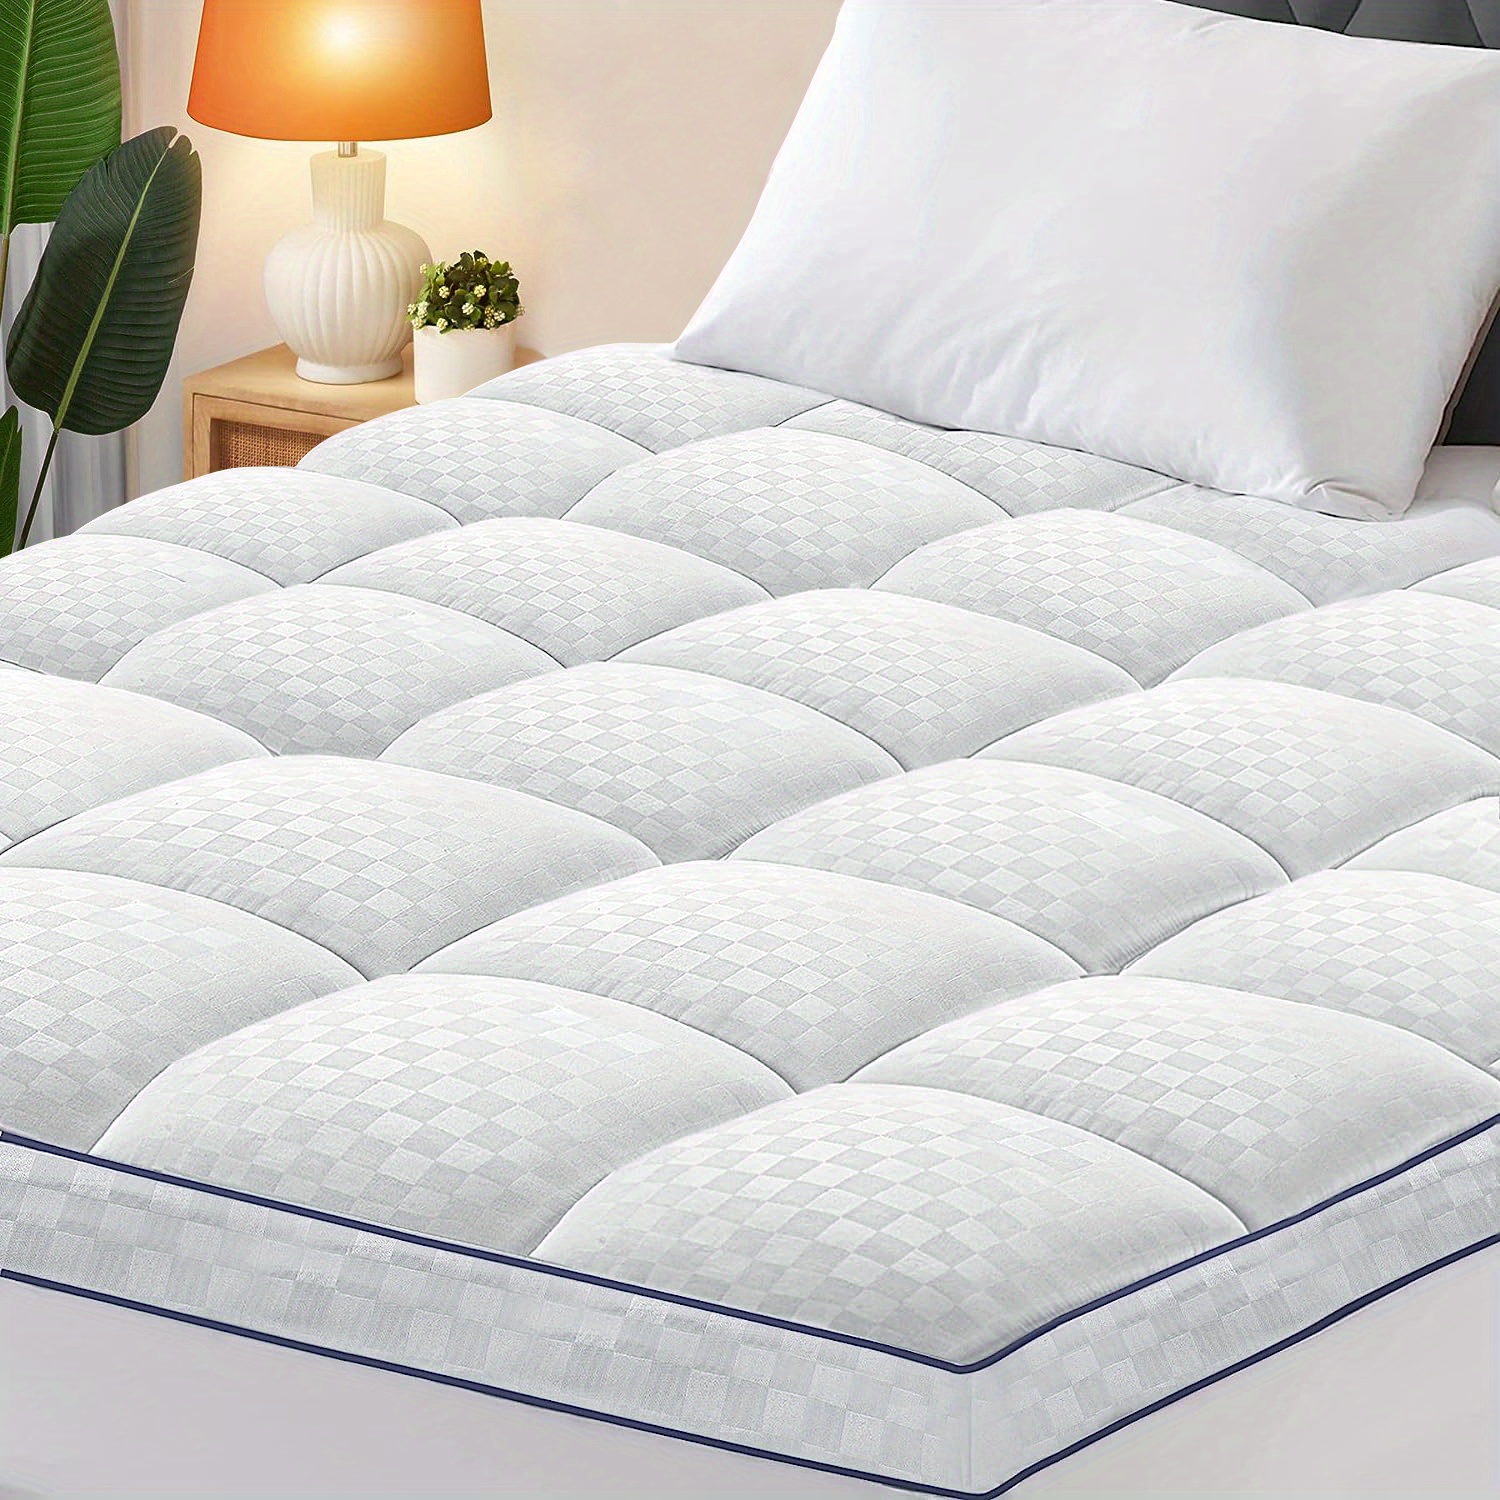 Queen Mattress Pad Thick Quilted Mattress Topper Air Mattress Cover, Super  Soft Breathable and Noiseless Down Alternative Fiber Extra Thick Mattress